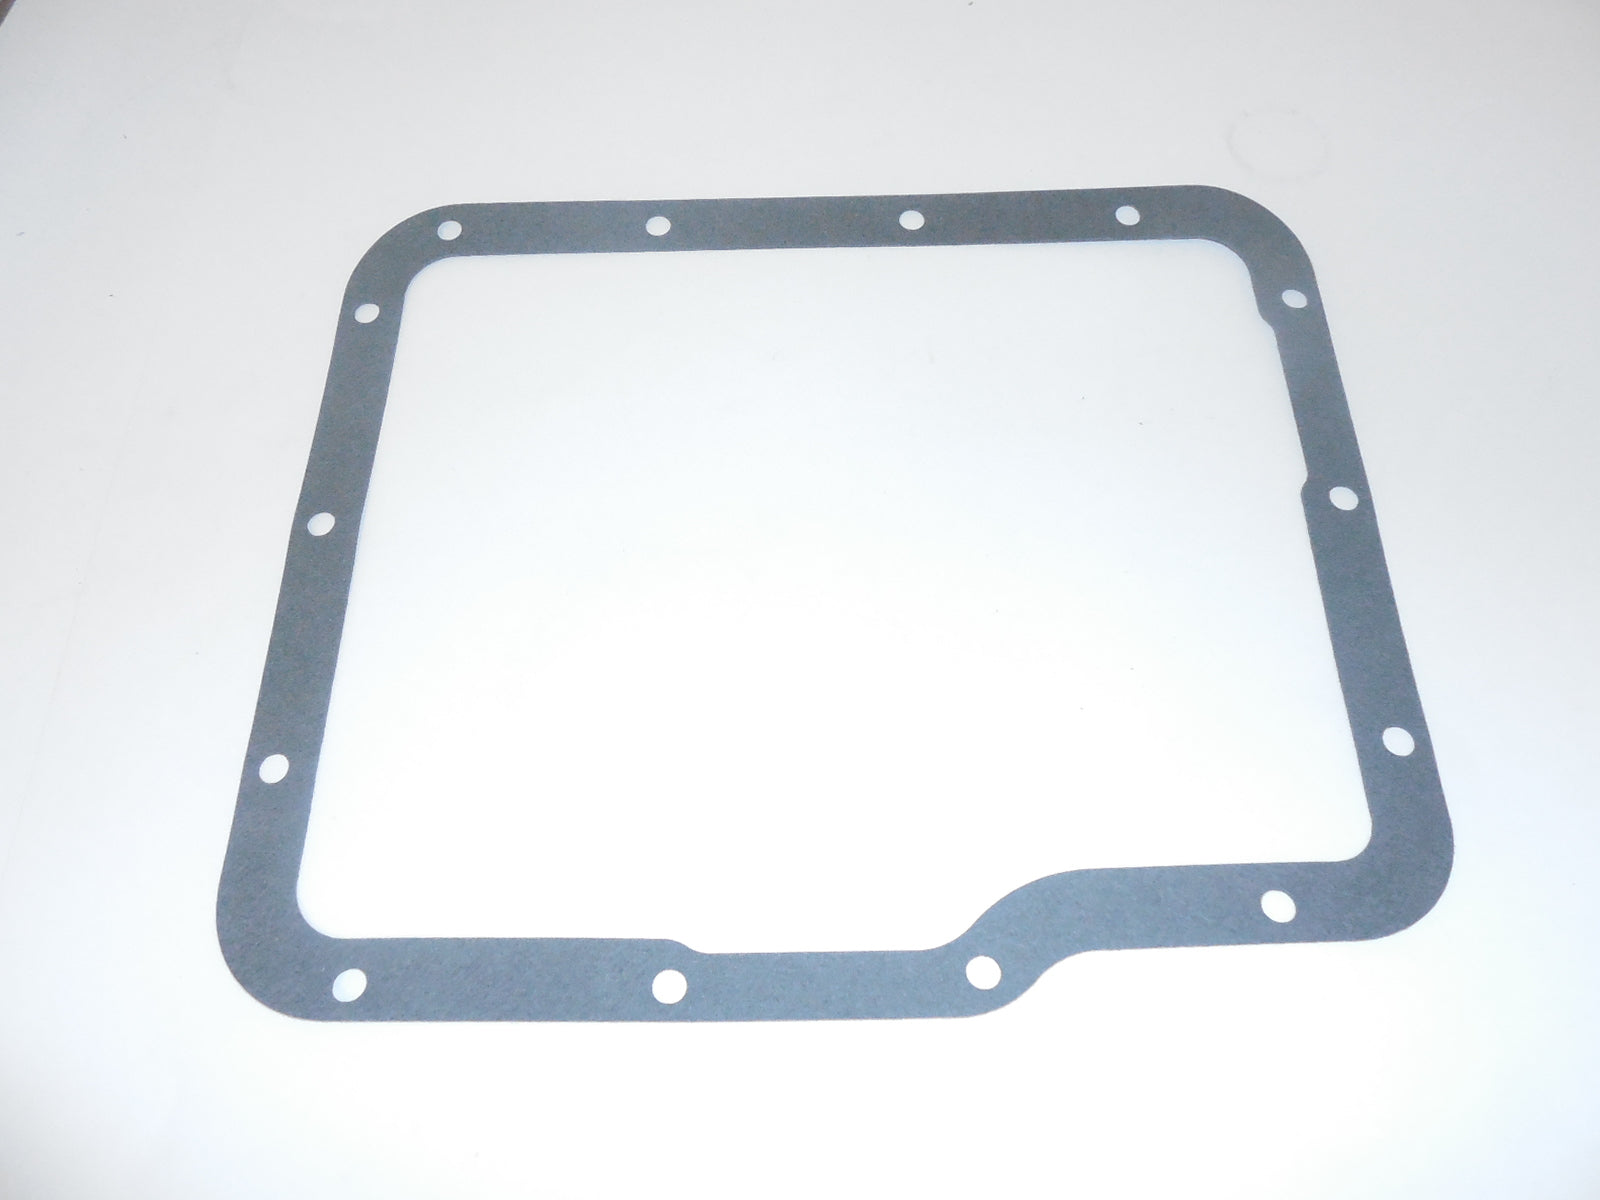 Racing Power Company R9124G Trans pan gasket fit power glide